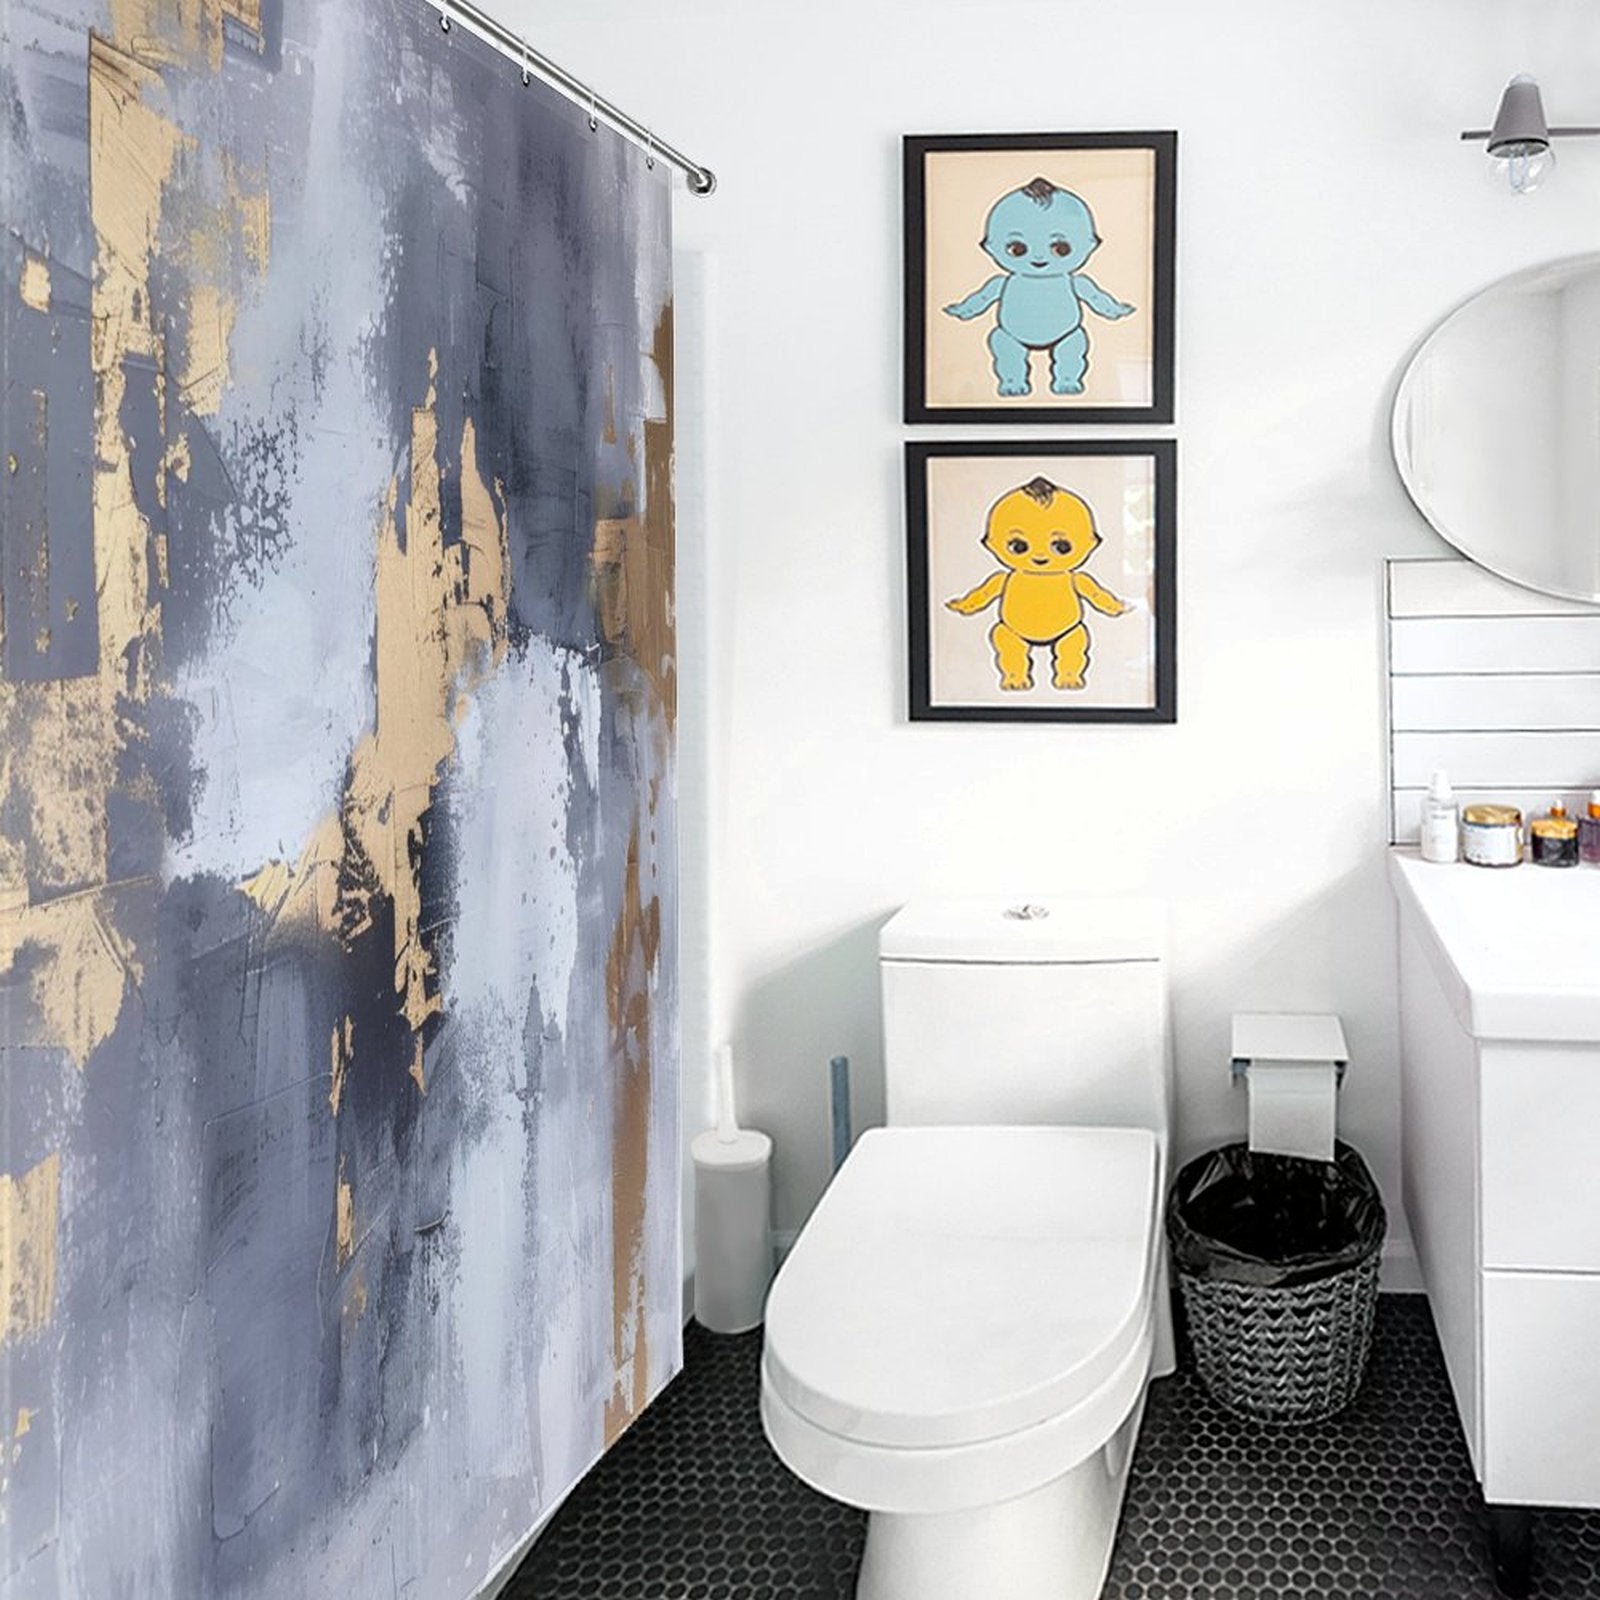 Contemporary bathroom with a white toilet, sink, round mirror, and Grey and Gold Watercolor Abstract Modern Art White Silver Strokes Shower Curtain-Cottoncat. Two framed baby-themed artworks hang on the wall above the toilet. Black hexagonal floor tiles add contrast to the space.